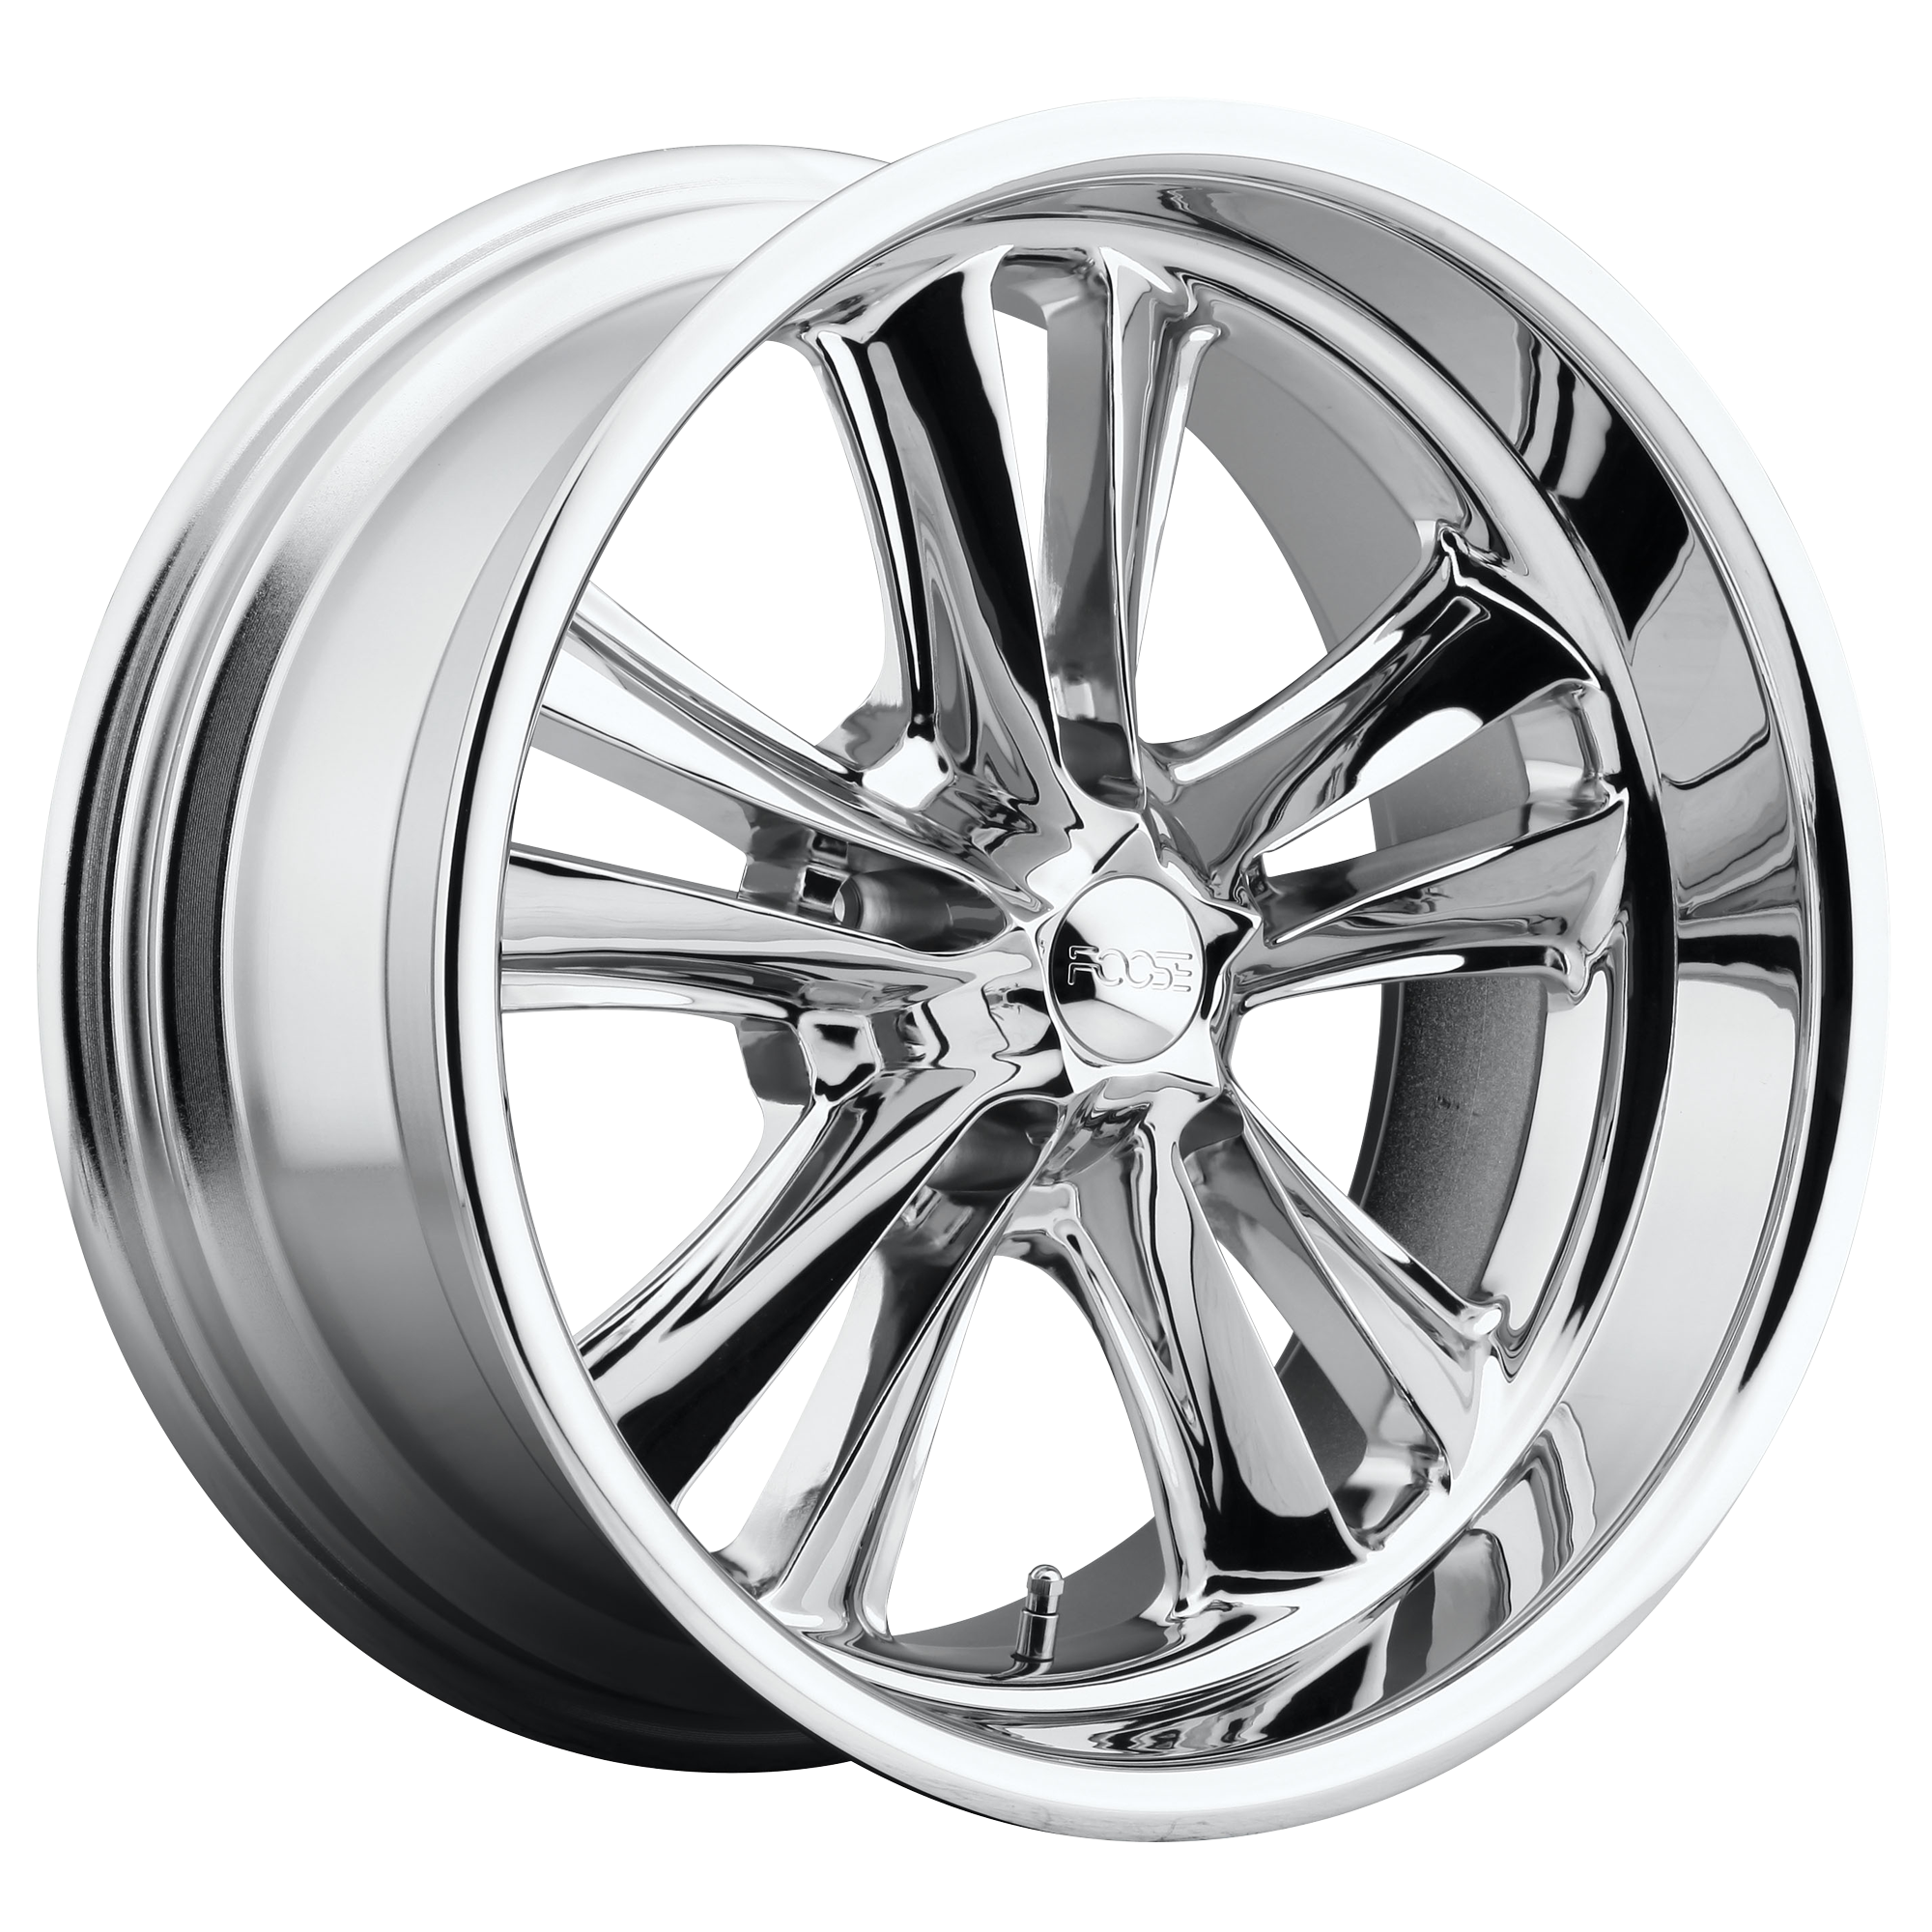 KNUCKLE 17x8 5x120.65 CHROME PLATED (1 mm) - Tires and Engine Performance